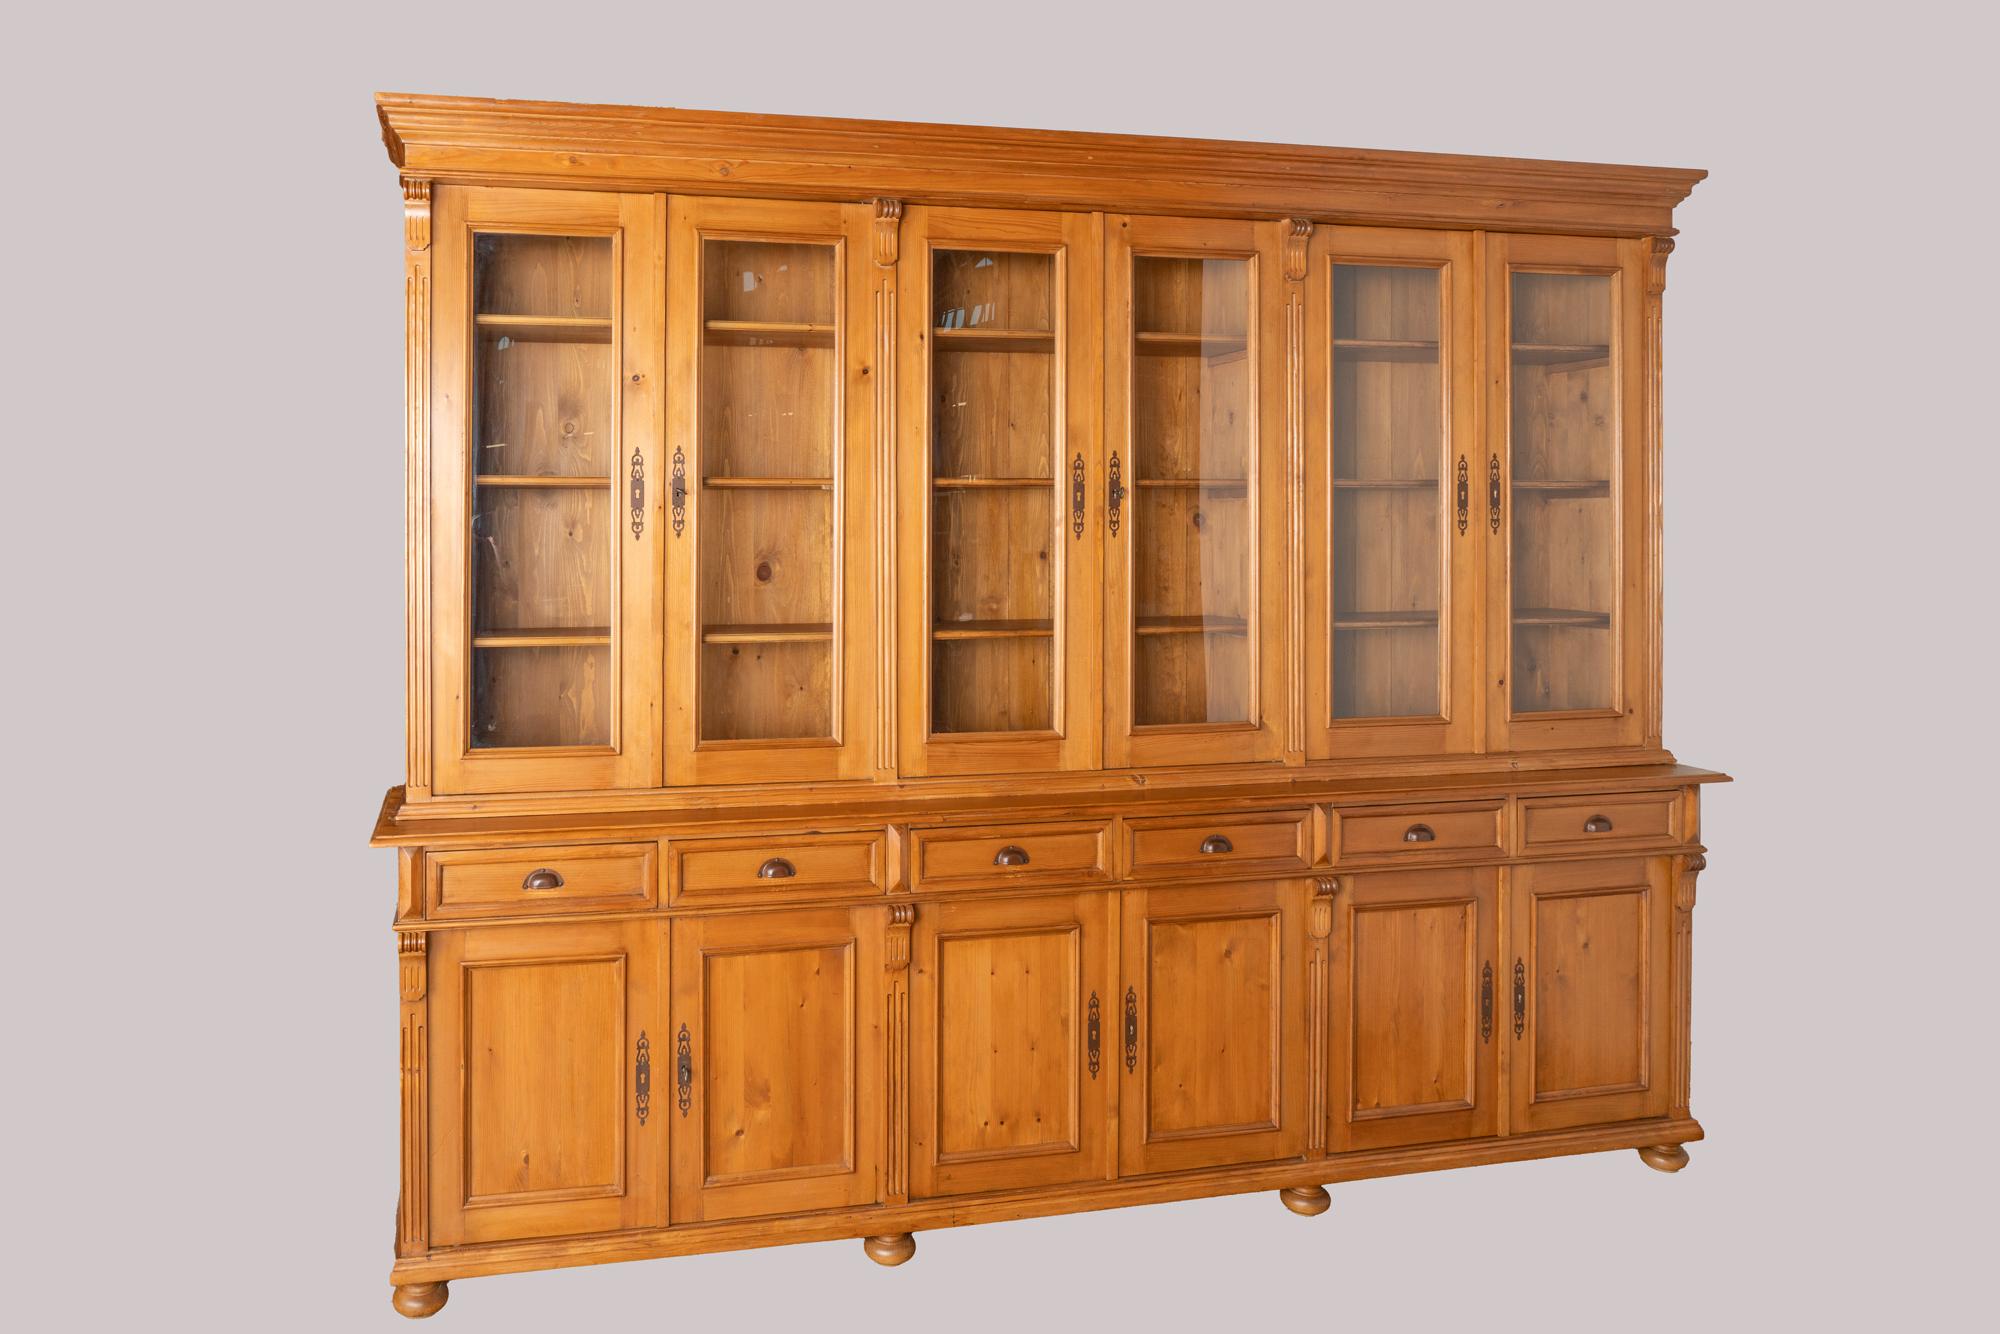 This striking large pine bookcase or display wall unit is a reproduction made in Europe and breaks down into two large cabinets.
The pine has a warm, inviting patina and country appeal thanks to a satin wax finish.
The upper display section with six